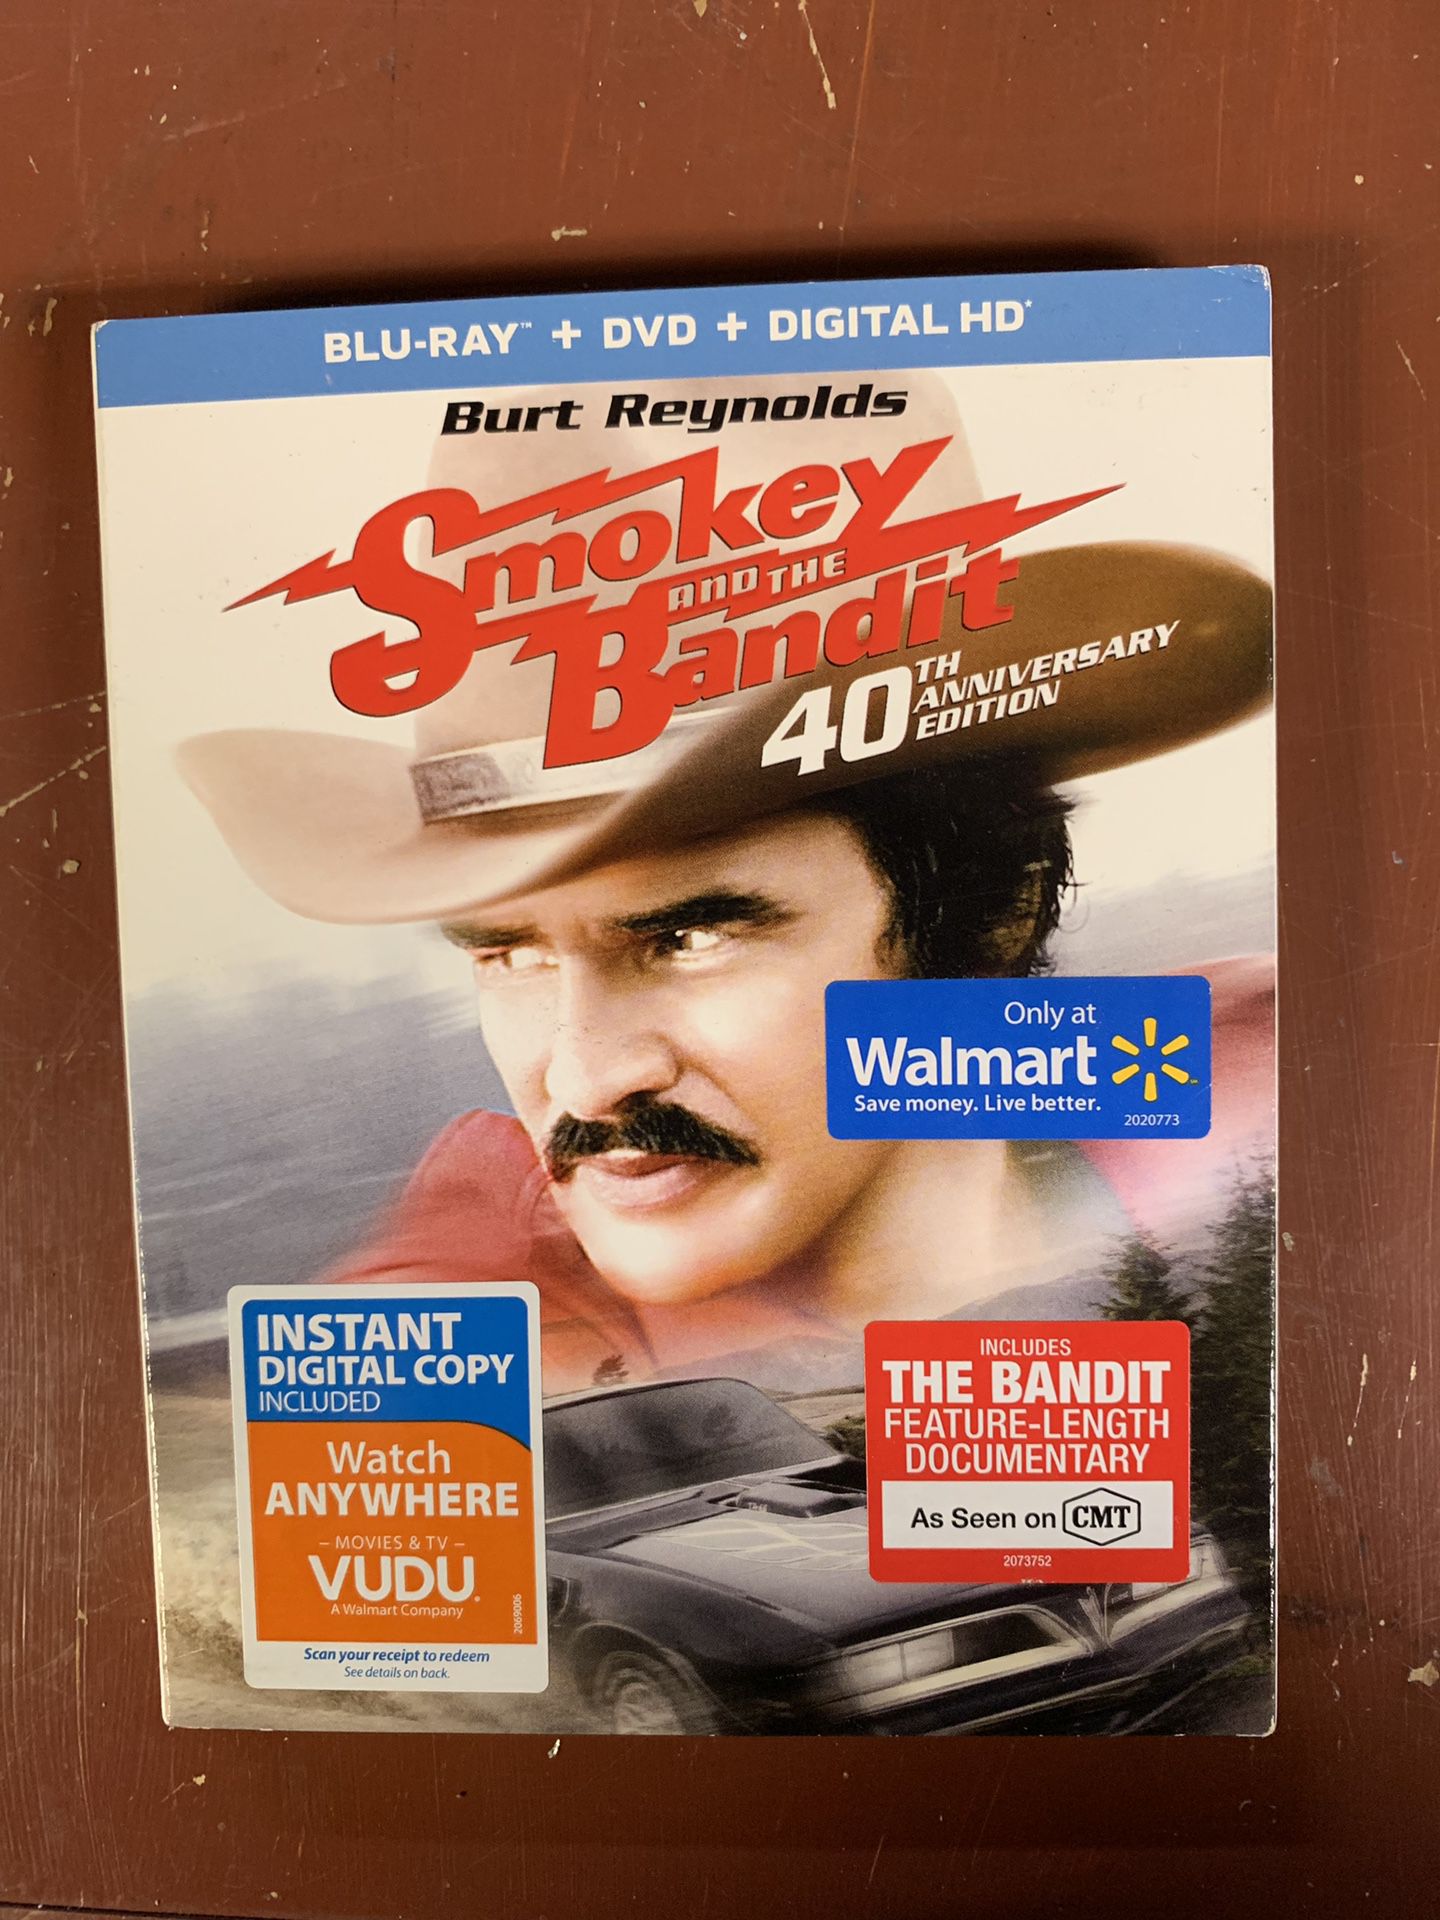 Smokey and the Bandit Sealed. Never opened and House of Cards Season 1 and Season 3 complete